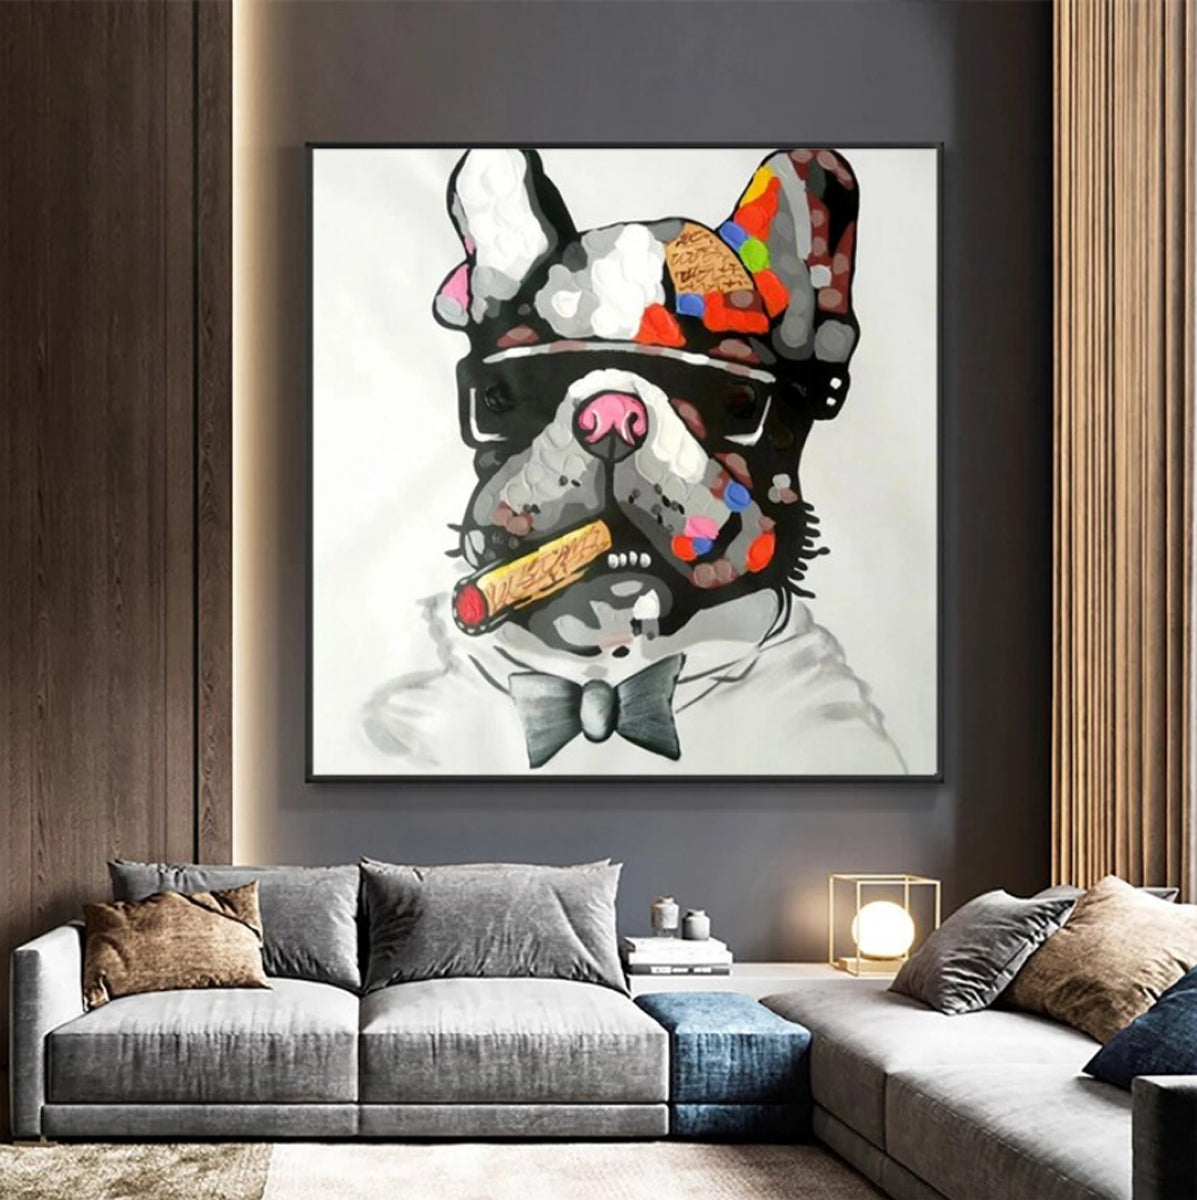 Funny Abstract, Poster and Colorful TPFLiving Motifs / / – Traumpreisfabrik Canvas Animal